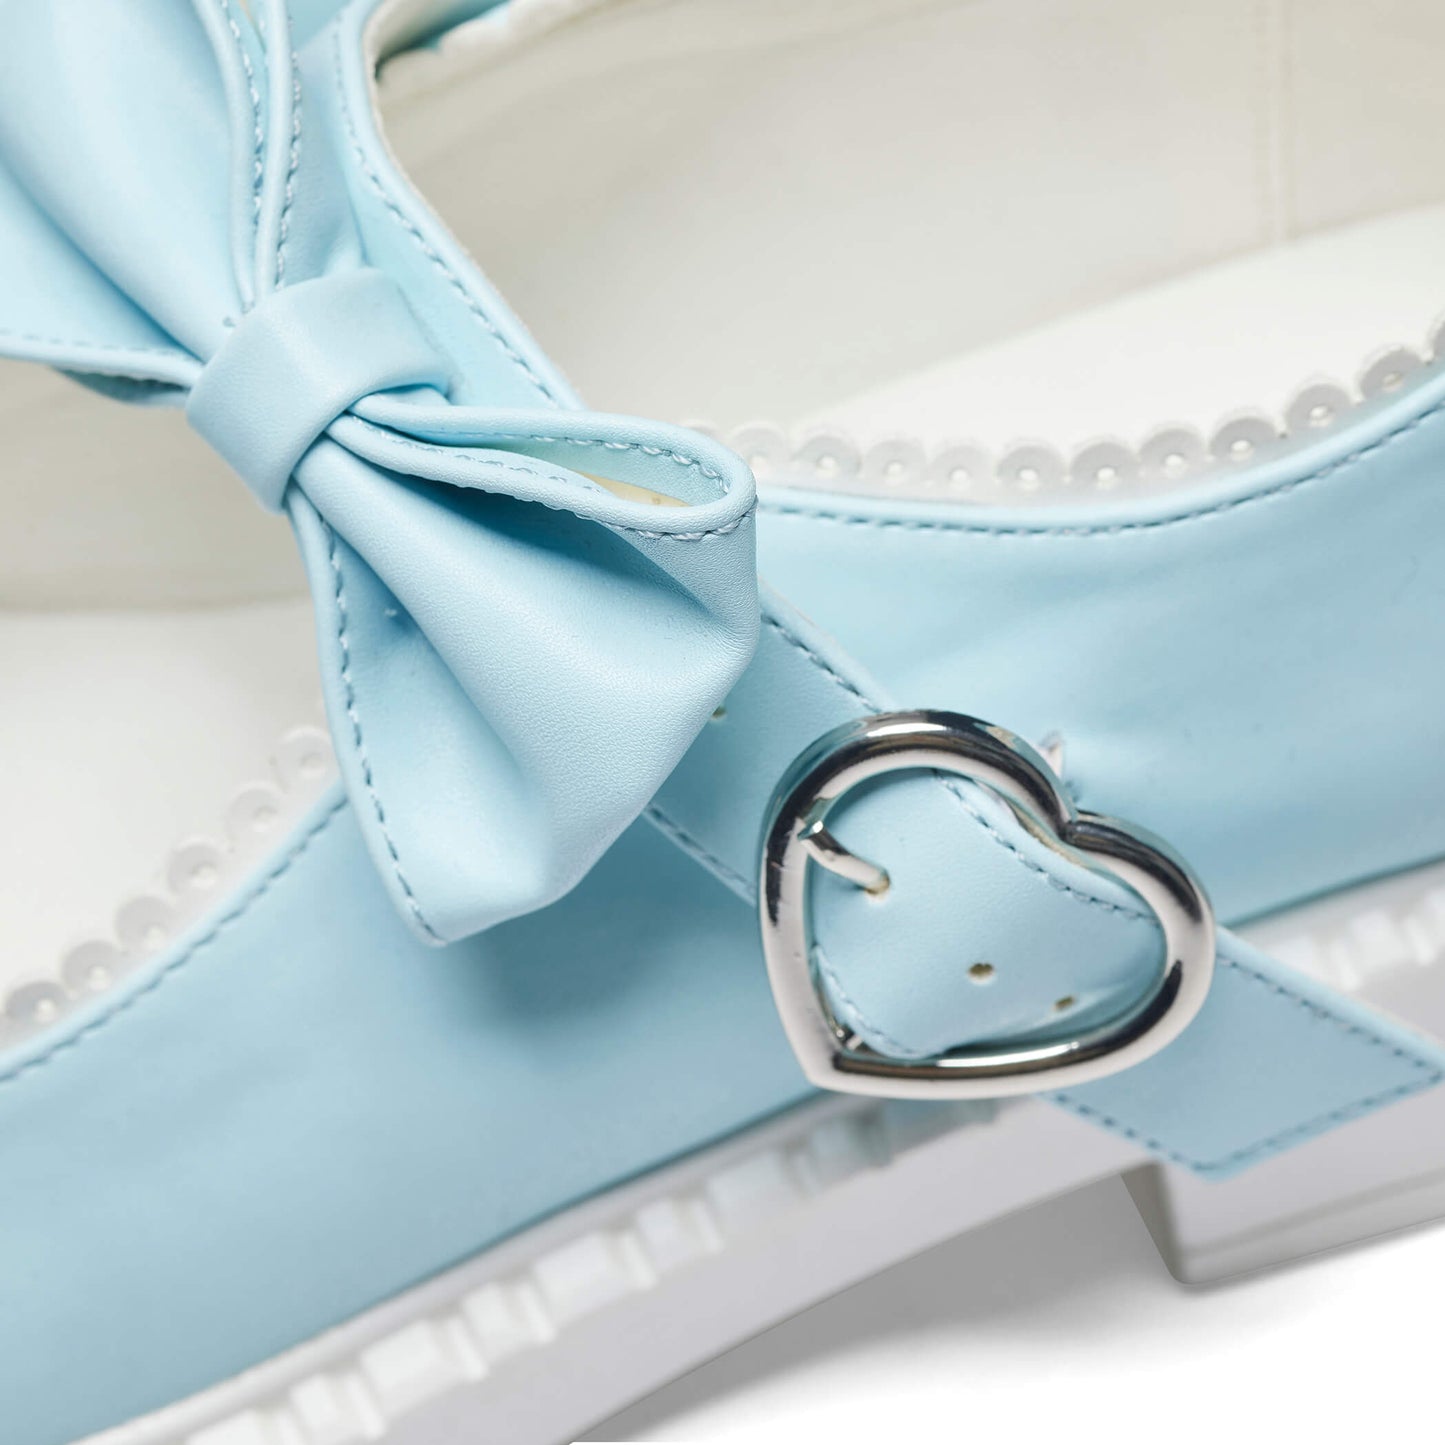 Fairy Lace Doily Mary Janes - Baby Blue - Mary Janes - KOI Footwear - Blue - Buckle Detail